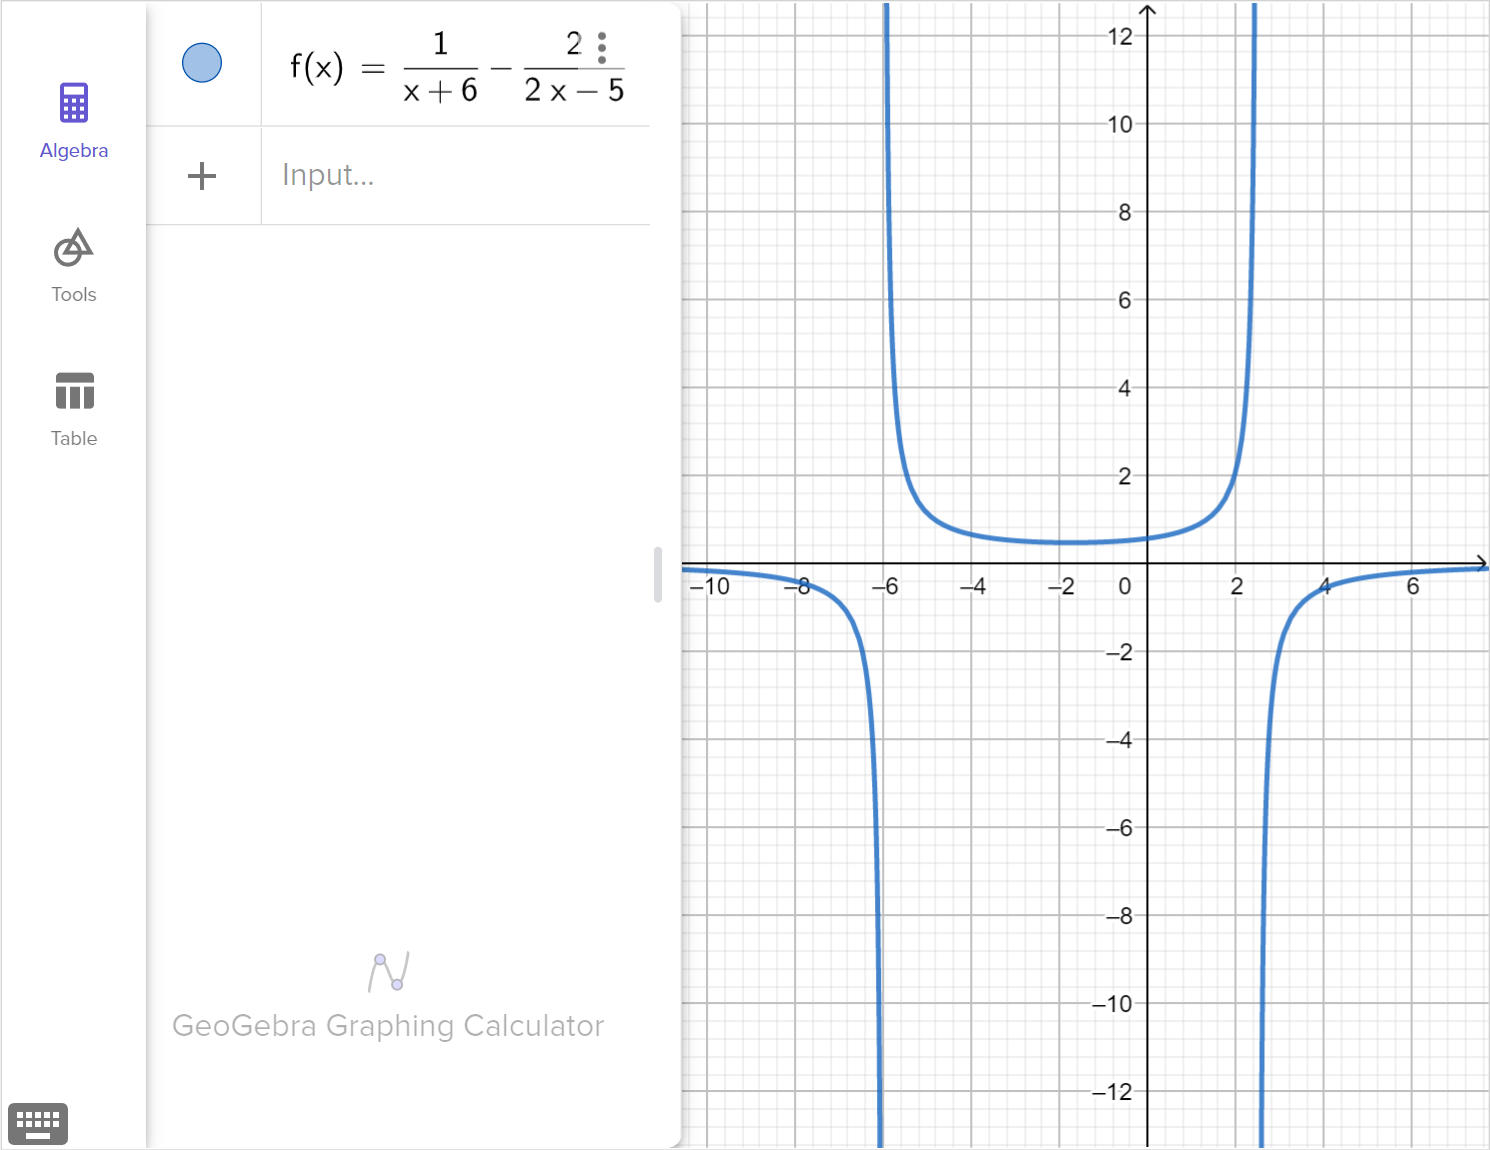 A screenshot of the GeoGebra graphing calculator showing the graph of f of x equals the fraction 1 over the quantity x plus 6 minus the fraction 2 over the quantity 2 x minus 5. Speak to your teacher for more details.